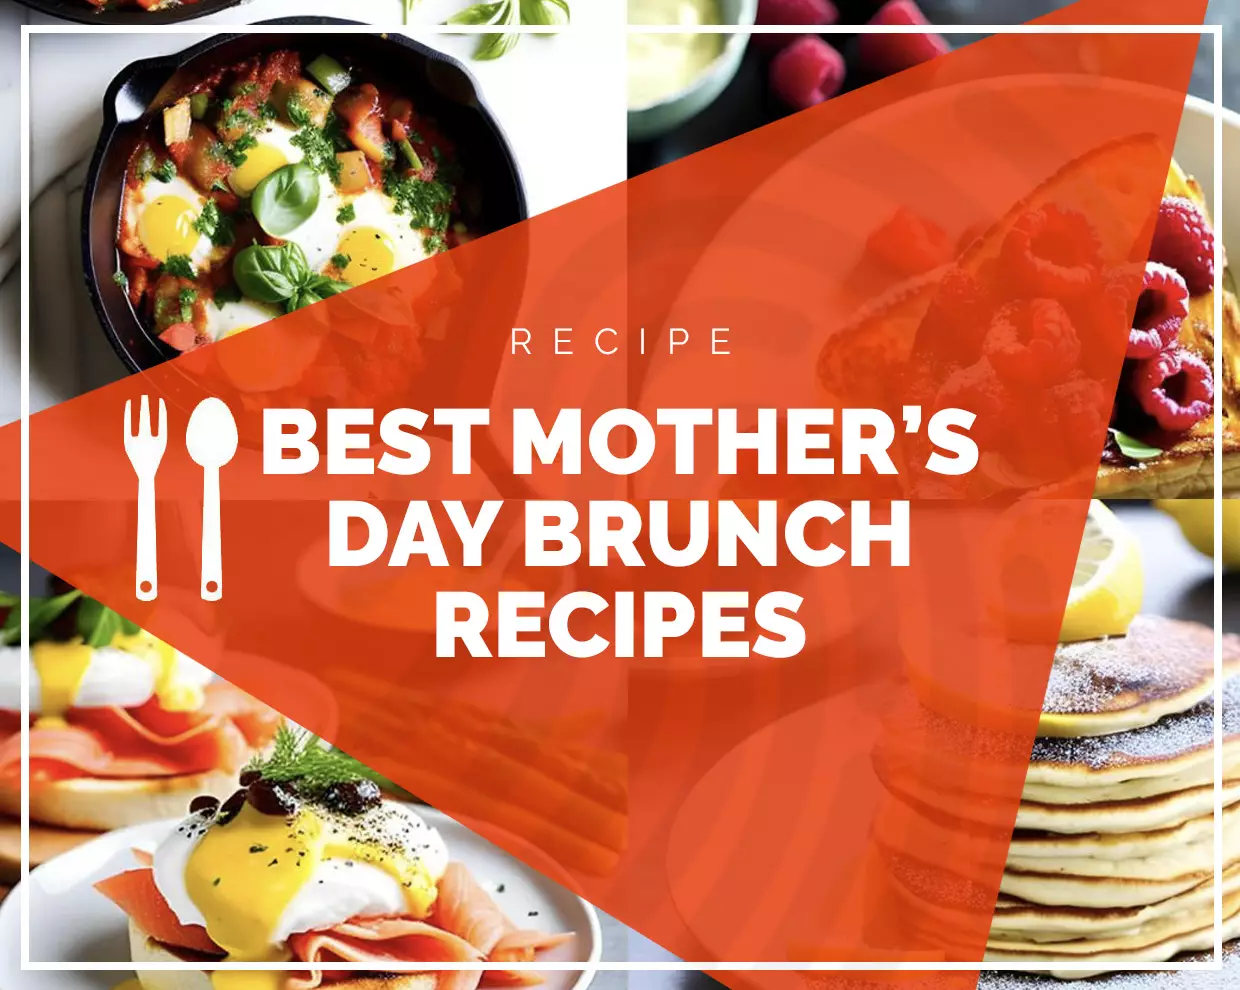 Best Mother's Day Brunch recipes 